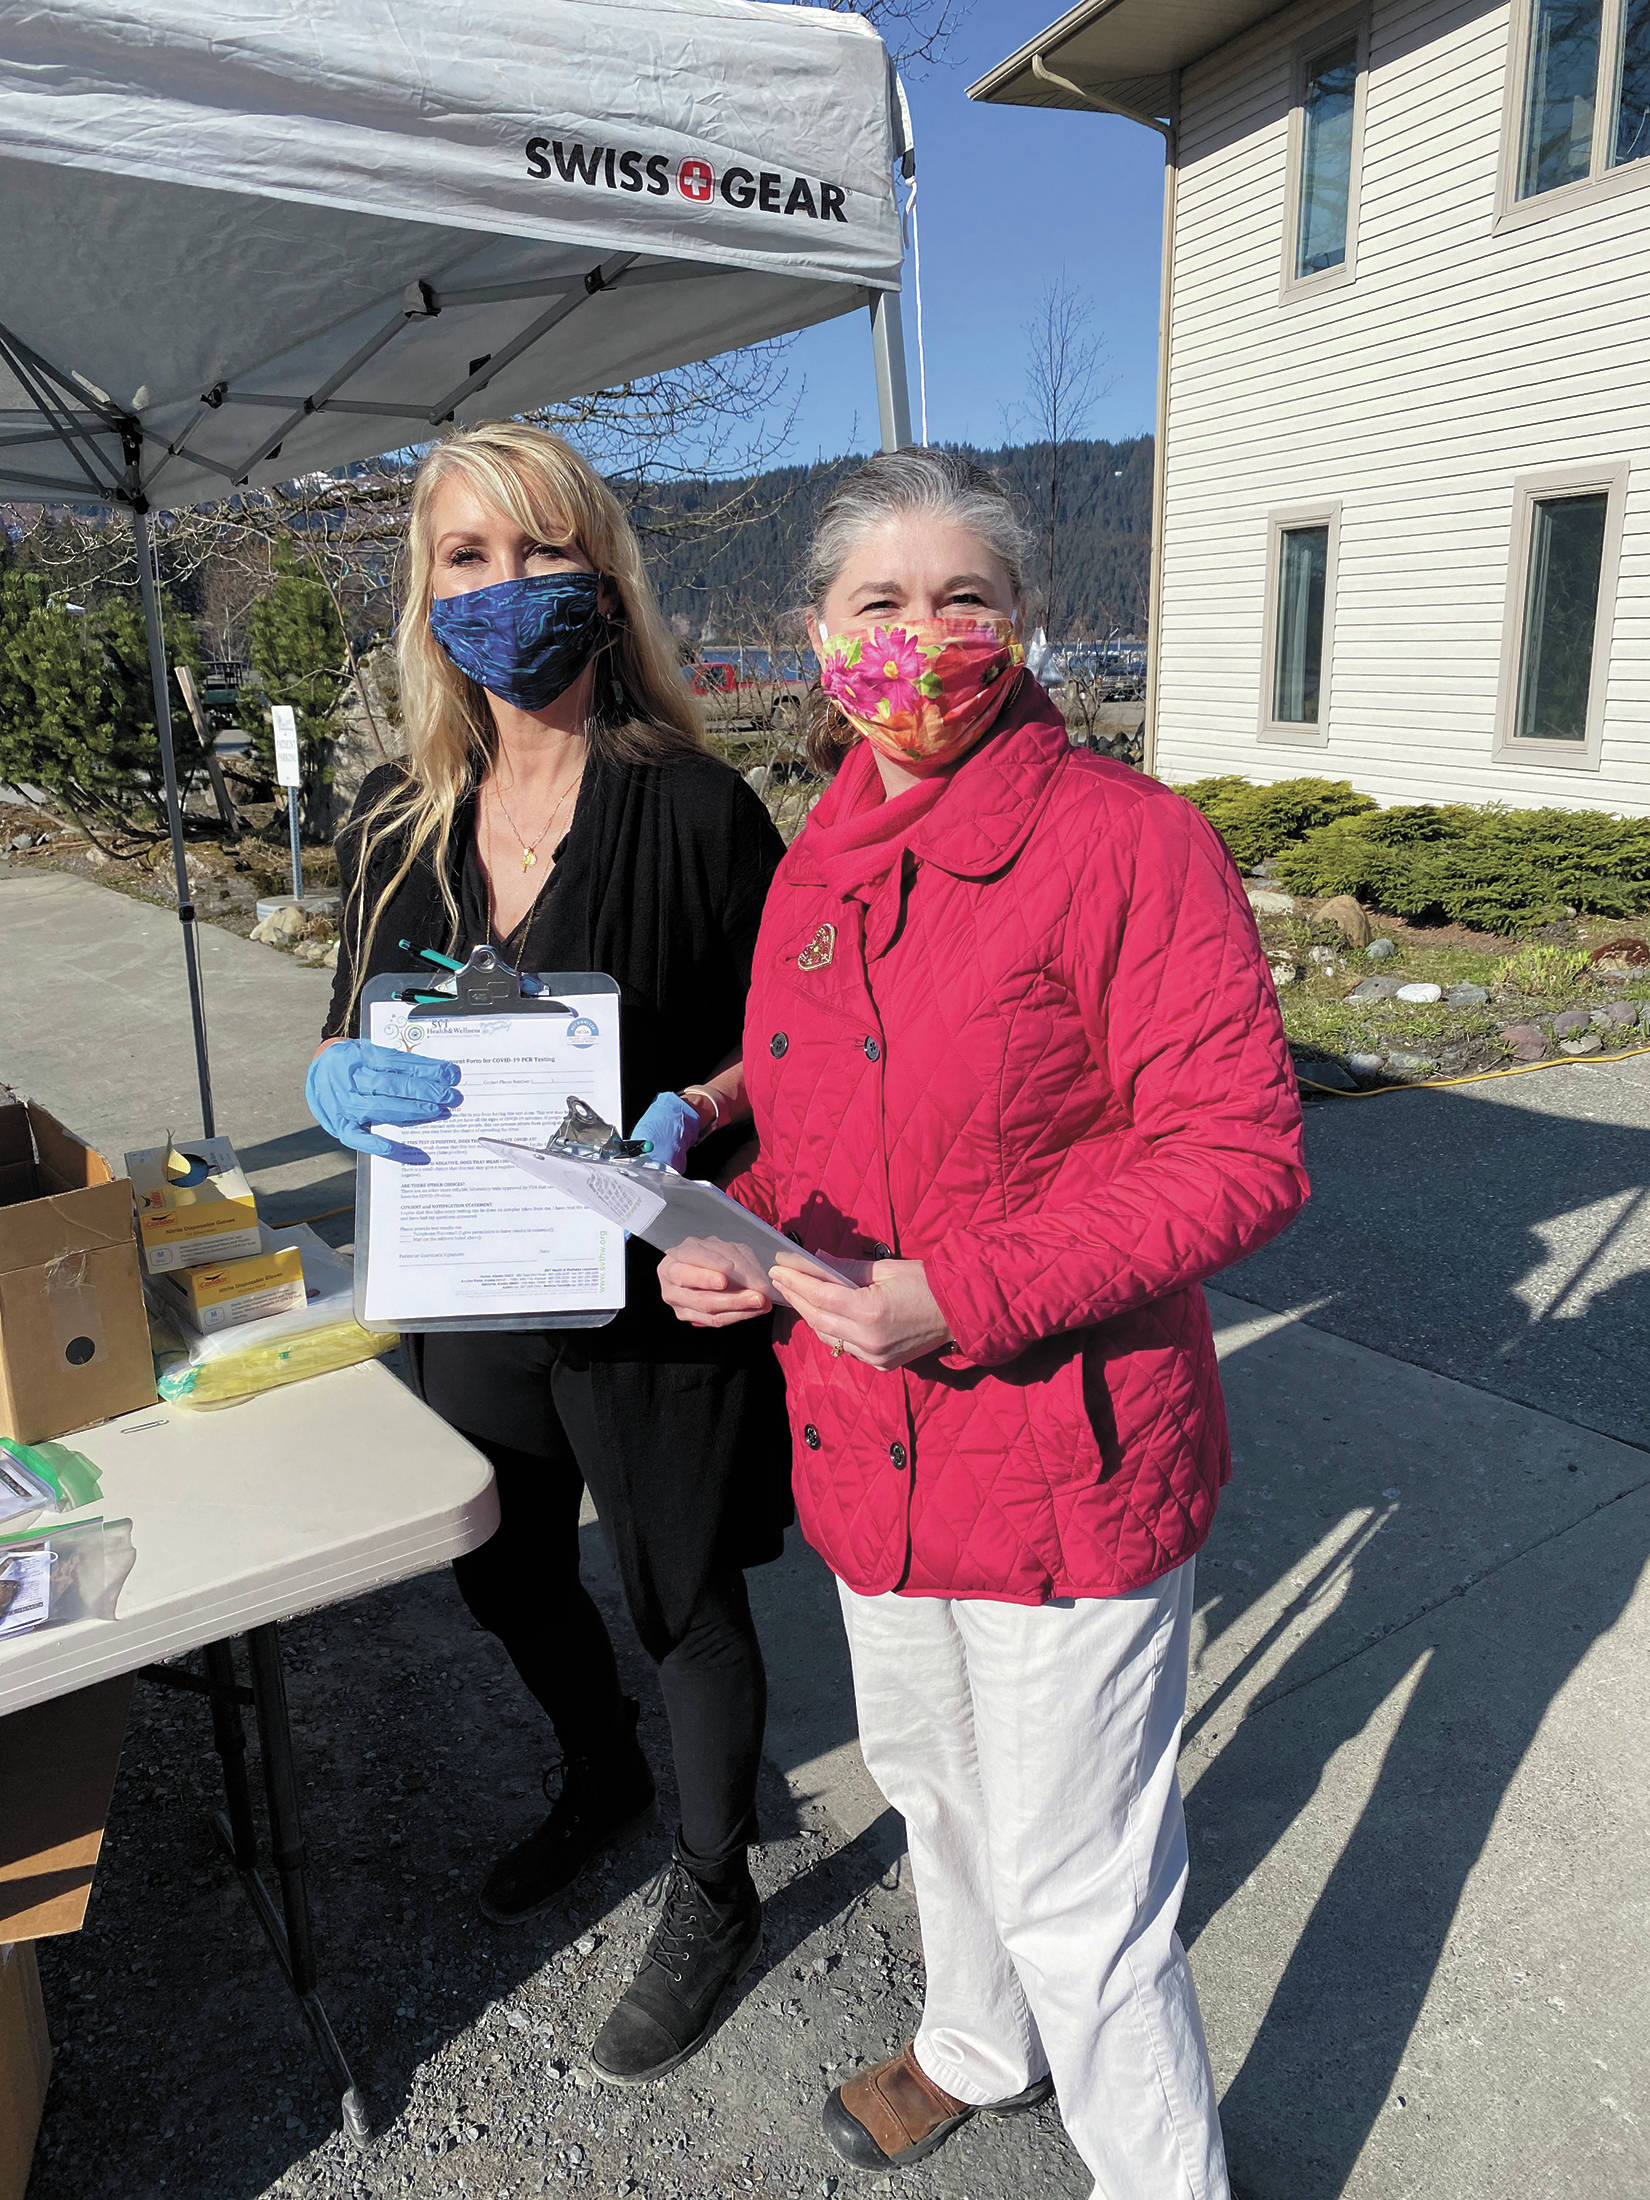 Seldovia Village Tribe CEO Crystal Collier, left, and SVT Health and Wellness Center Prevention Coordinator Shannon Custer, right, conduct free COVID-19 testing on Wednesday, April 29, 2020 in Seldovia, Alaska. (Photo courtesy Seldovia Village Tribe)